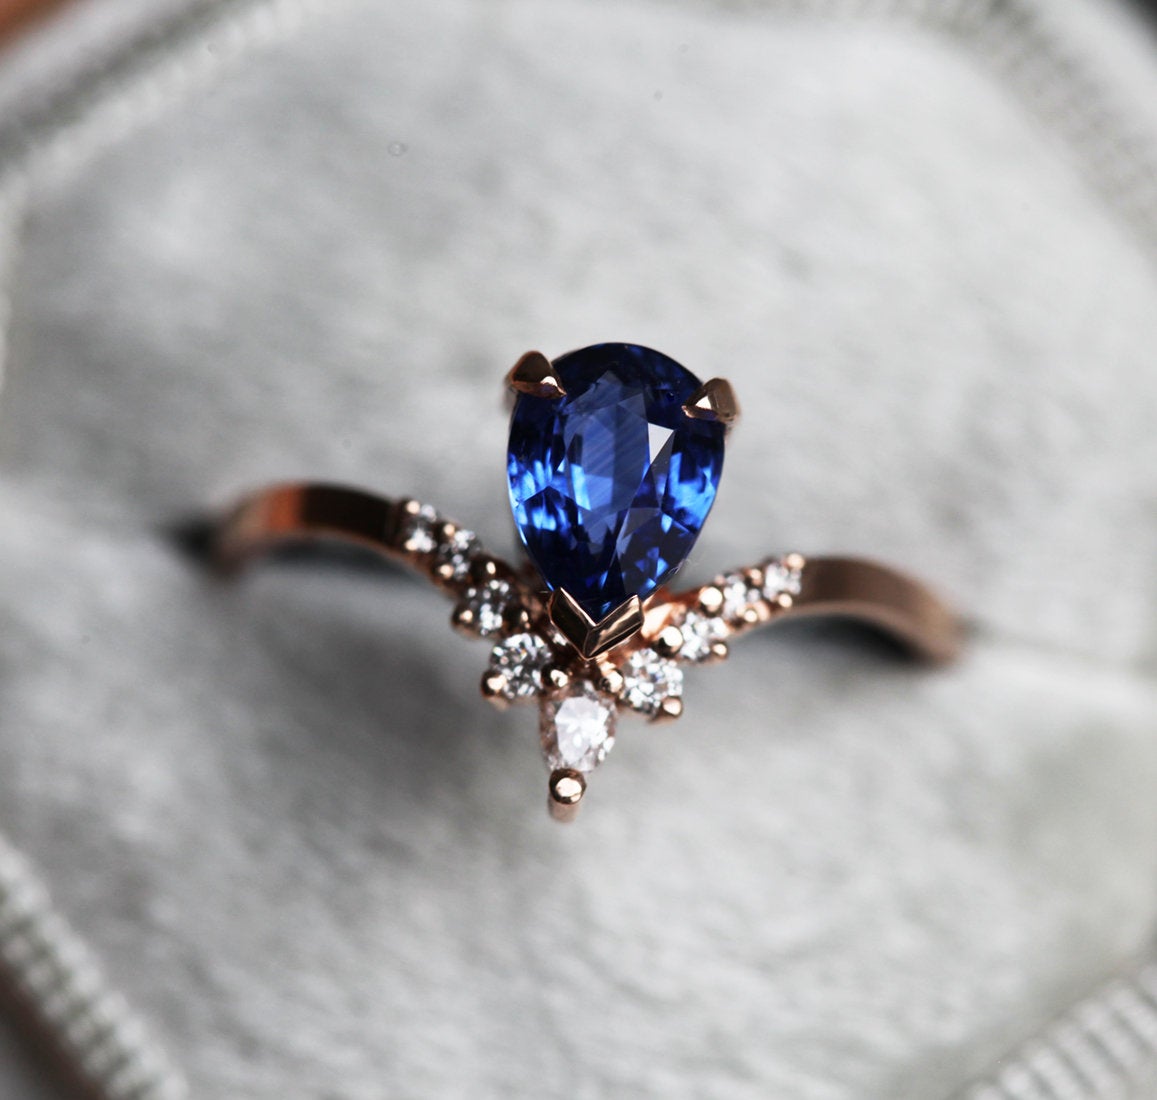 Pear-shaped blue sapphire ring with white diamonds